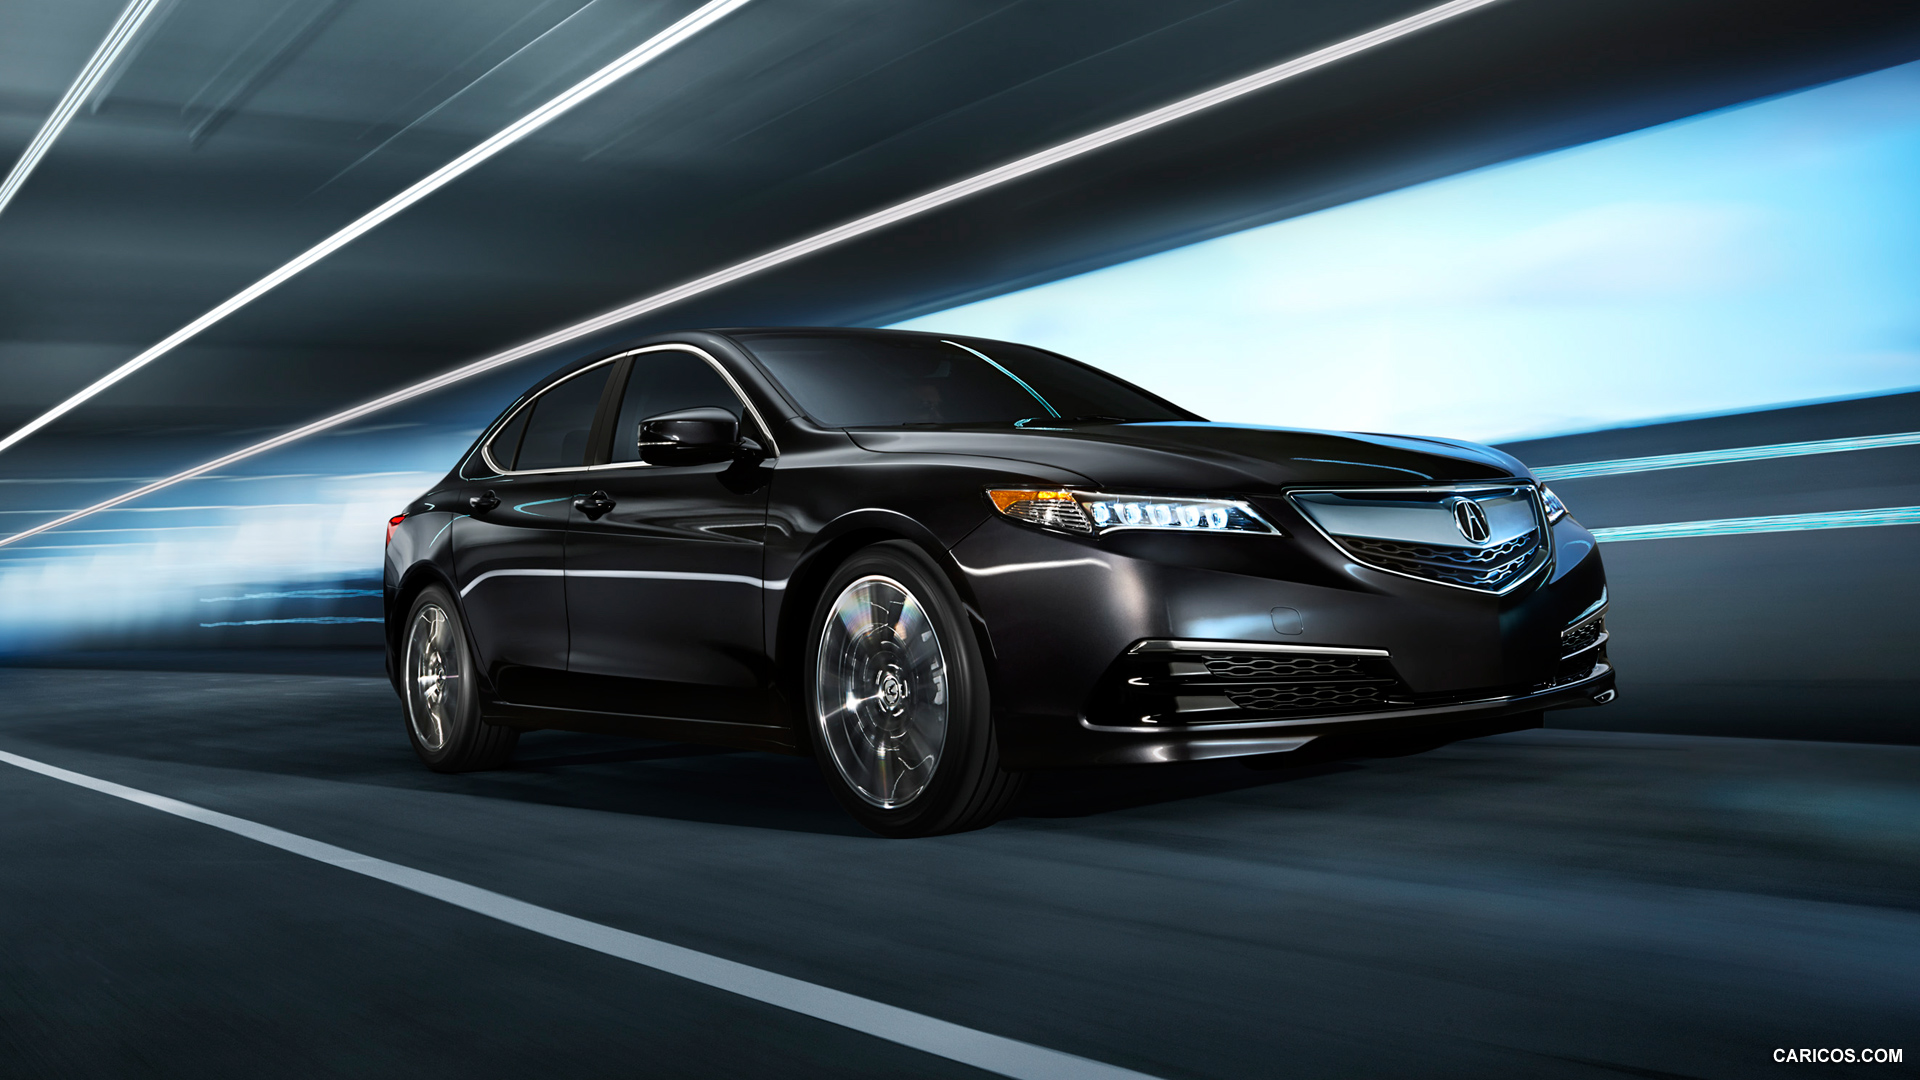 Free Download 2015 Acura Tlx Front Hd Wallpaper 3 1920x1080 For Your Desktop Mobile Tablet Explore 35 Acura Tlx Wallpapers Acura Tlx Wallpapers 2021 Acura Tlx Type S Wallpapers Acura Wallpaper